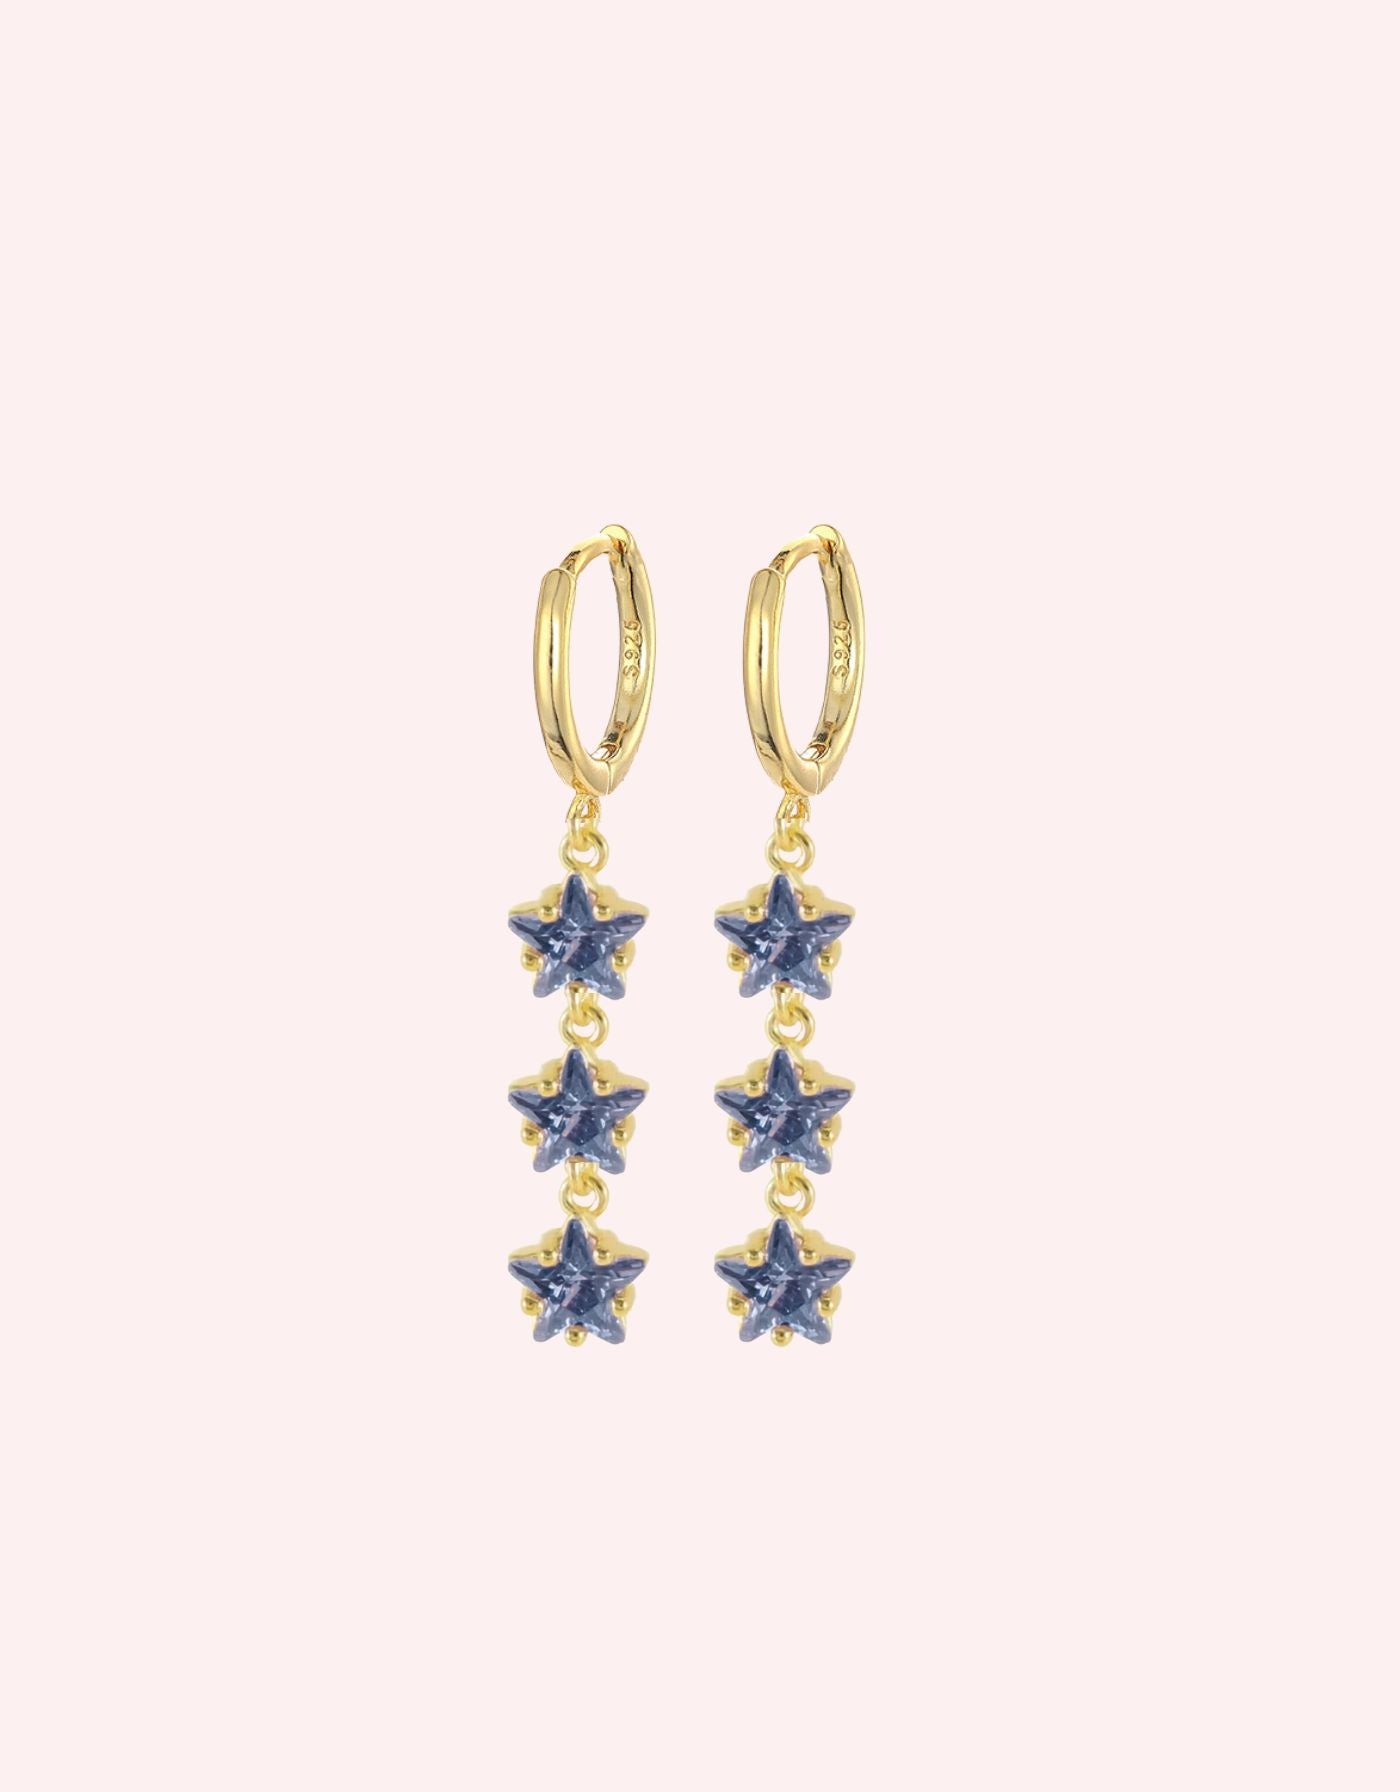 Jelly star huggies gold/blue - Smoothie London - Sterling Silver